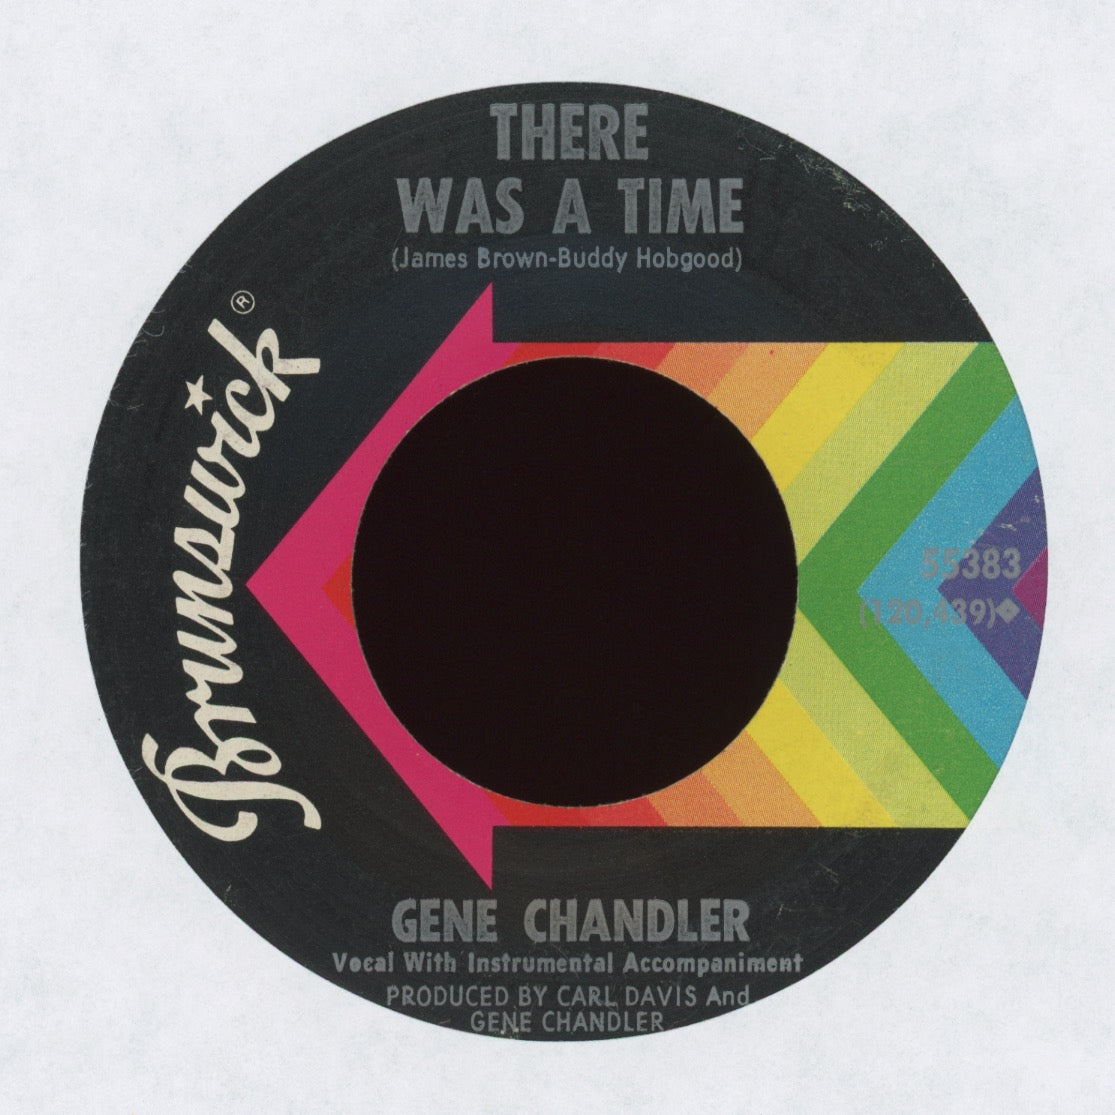 Gene Chandler - There Was A Time on Brunswick